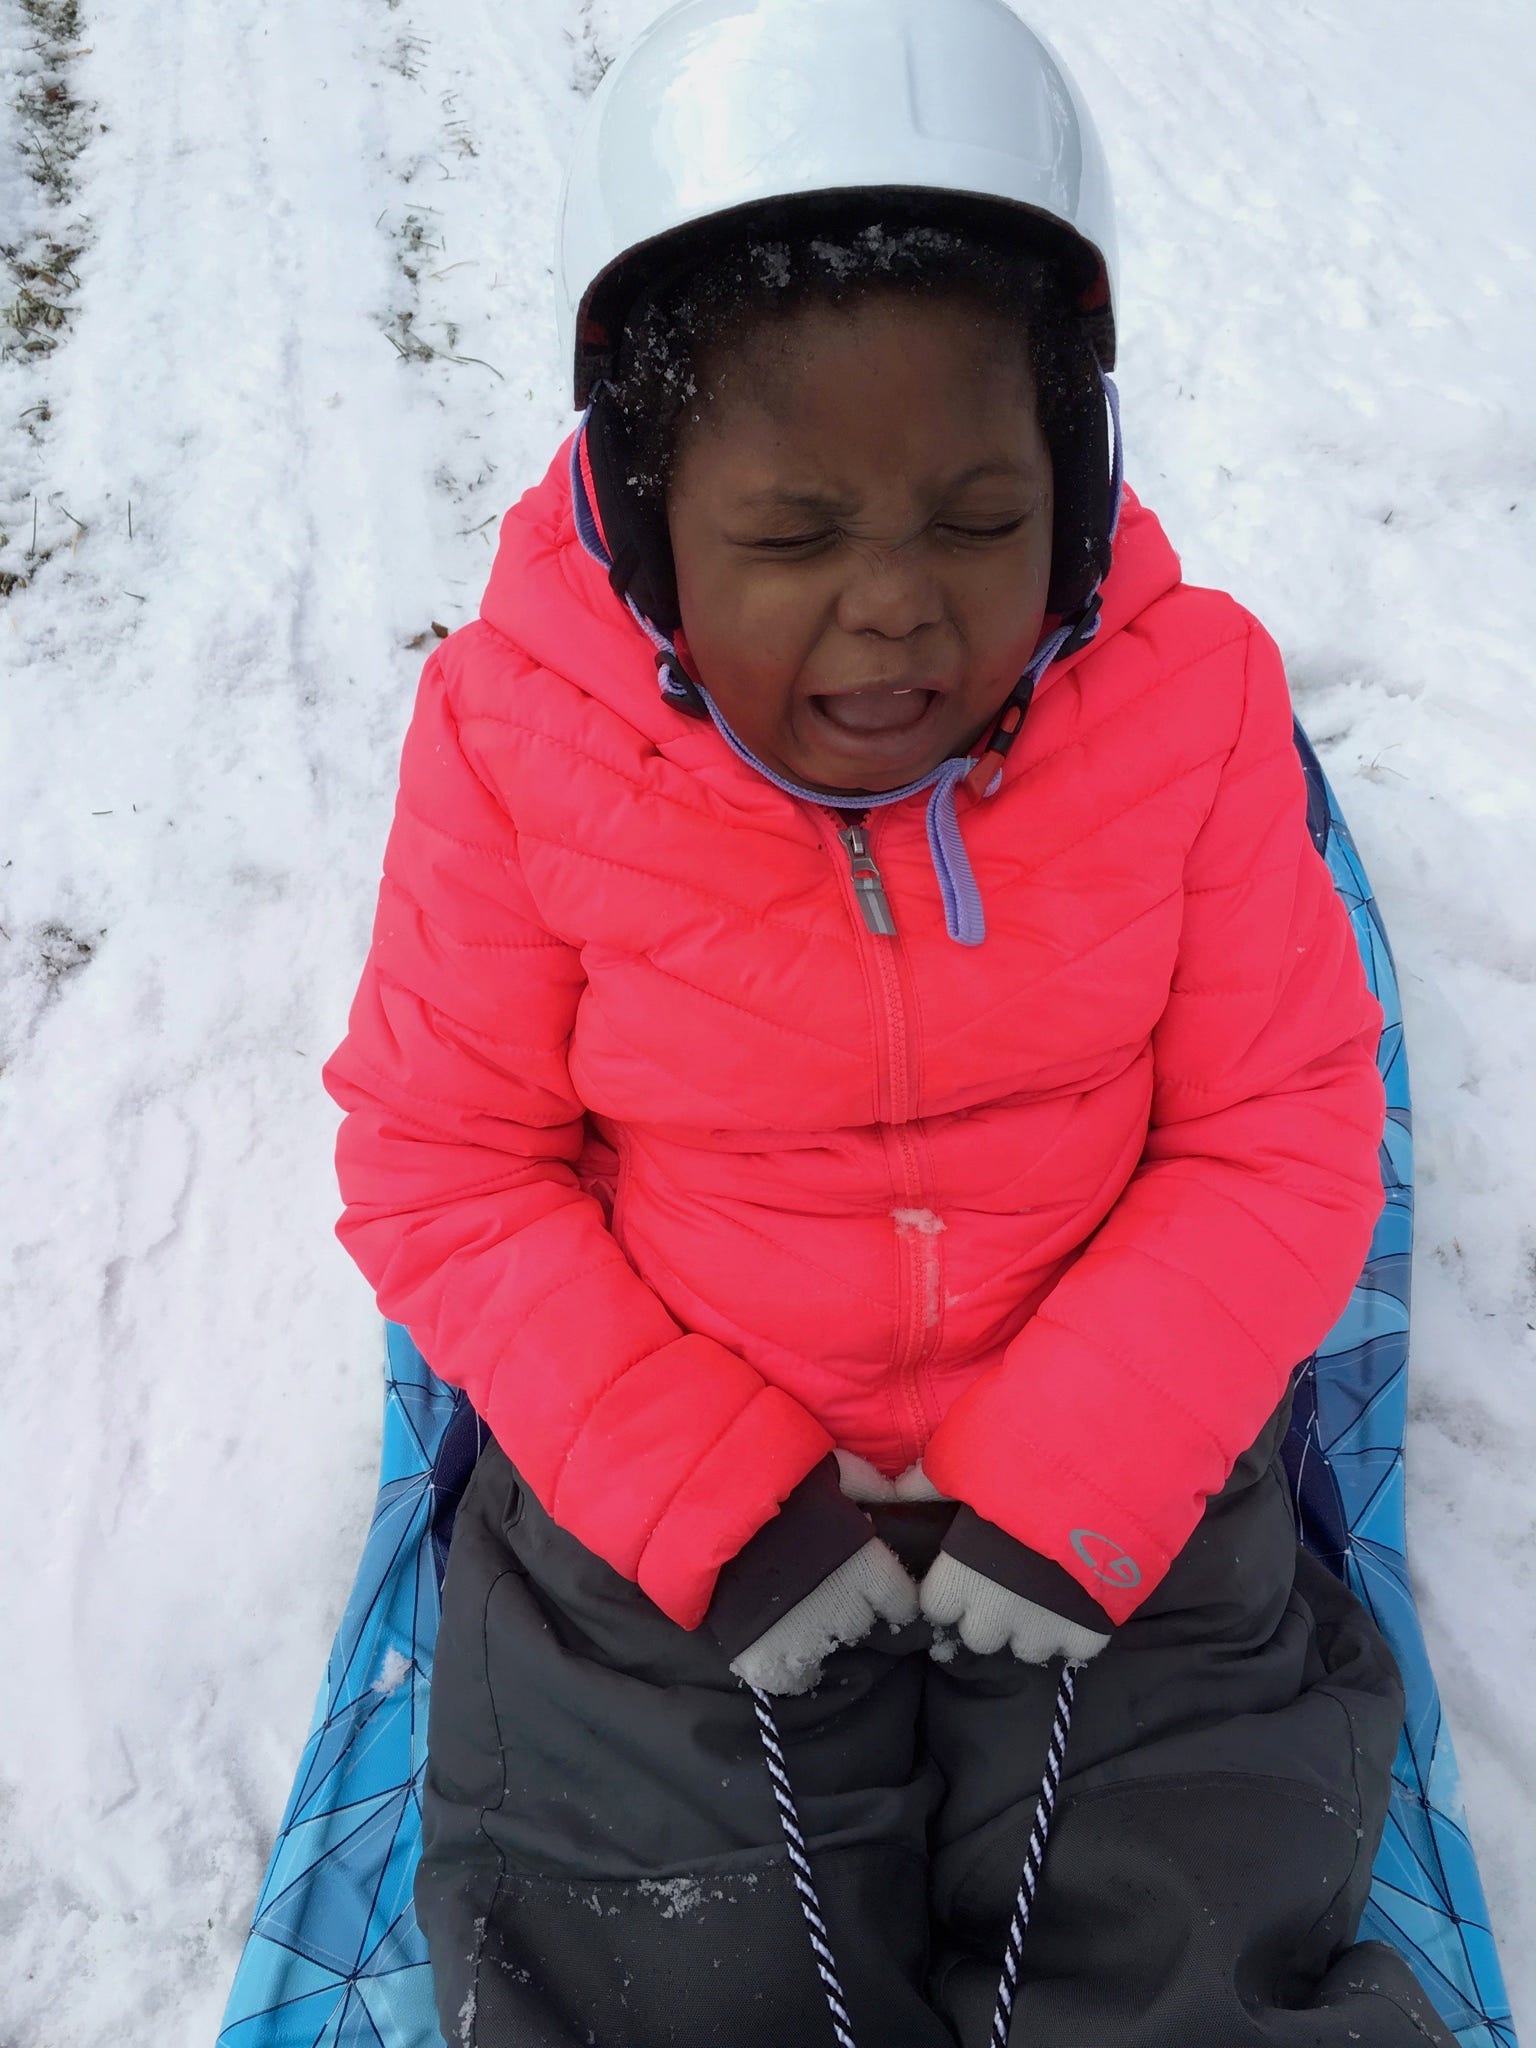 Chika makes a funny face while sledding.